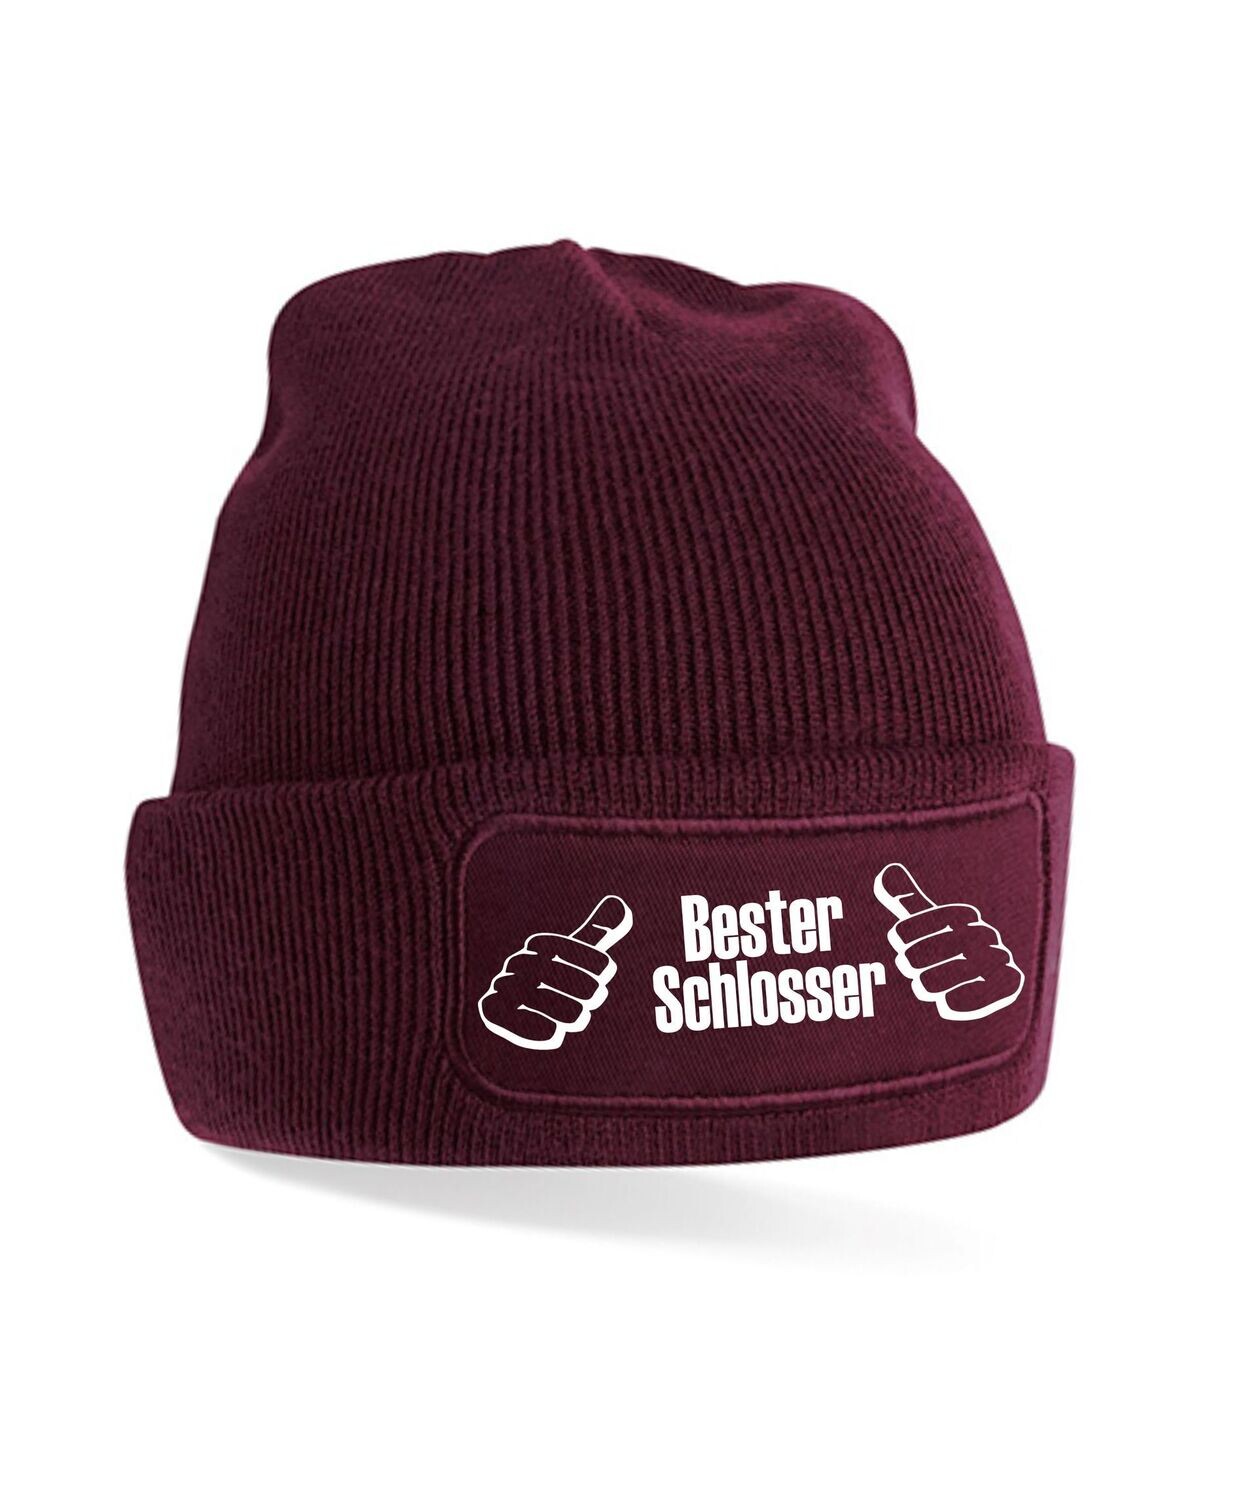 Patch Beanie Bester ........